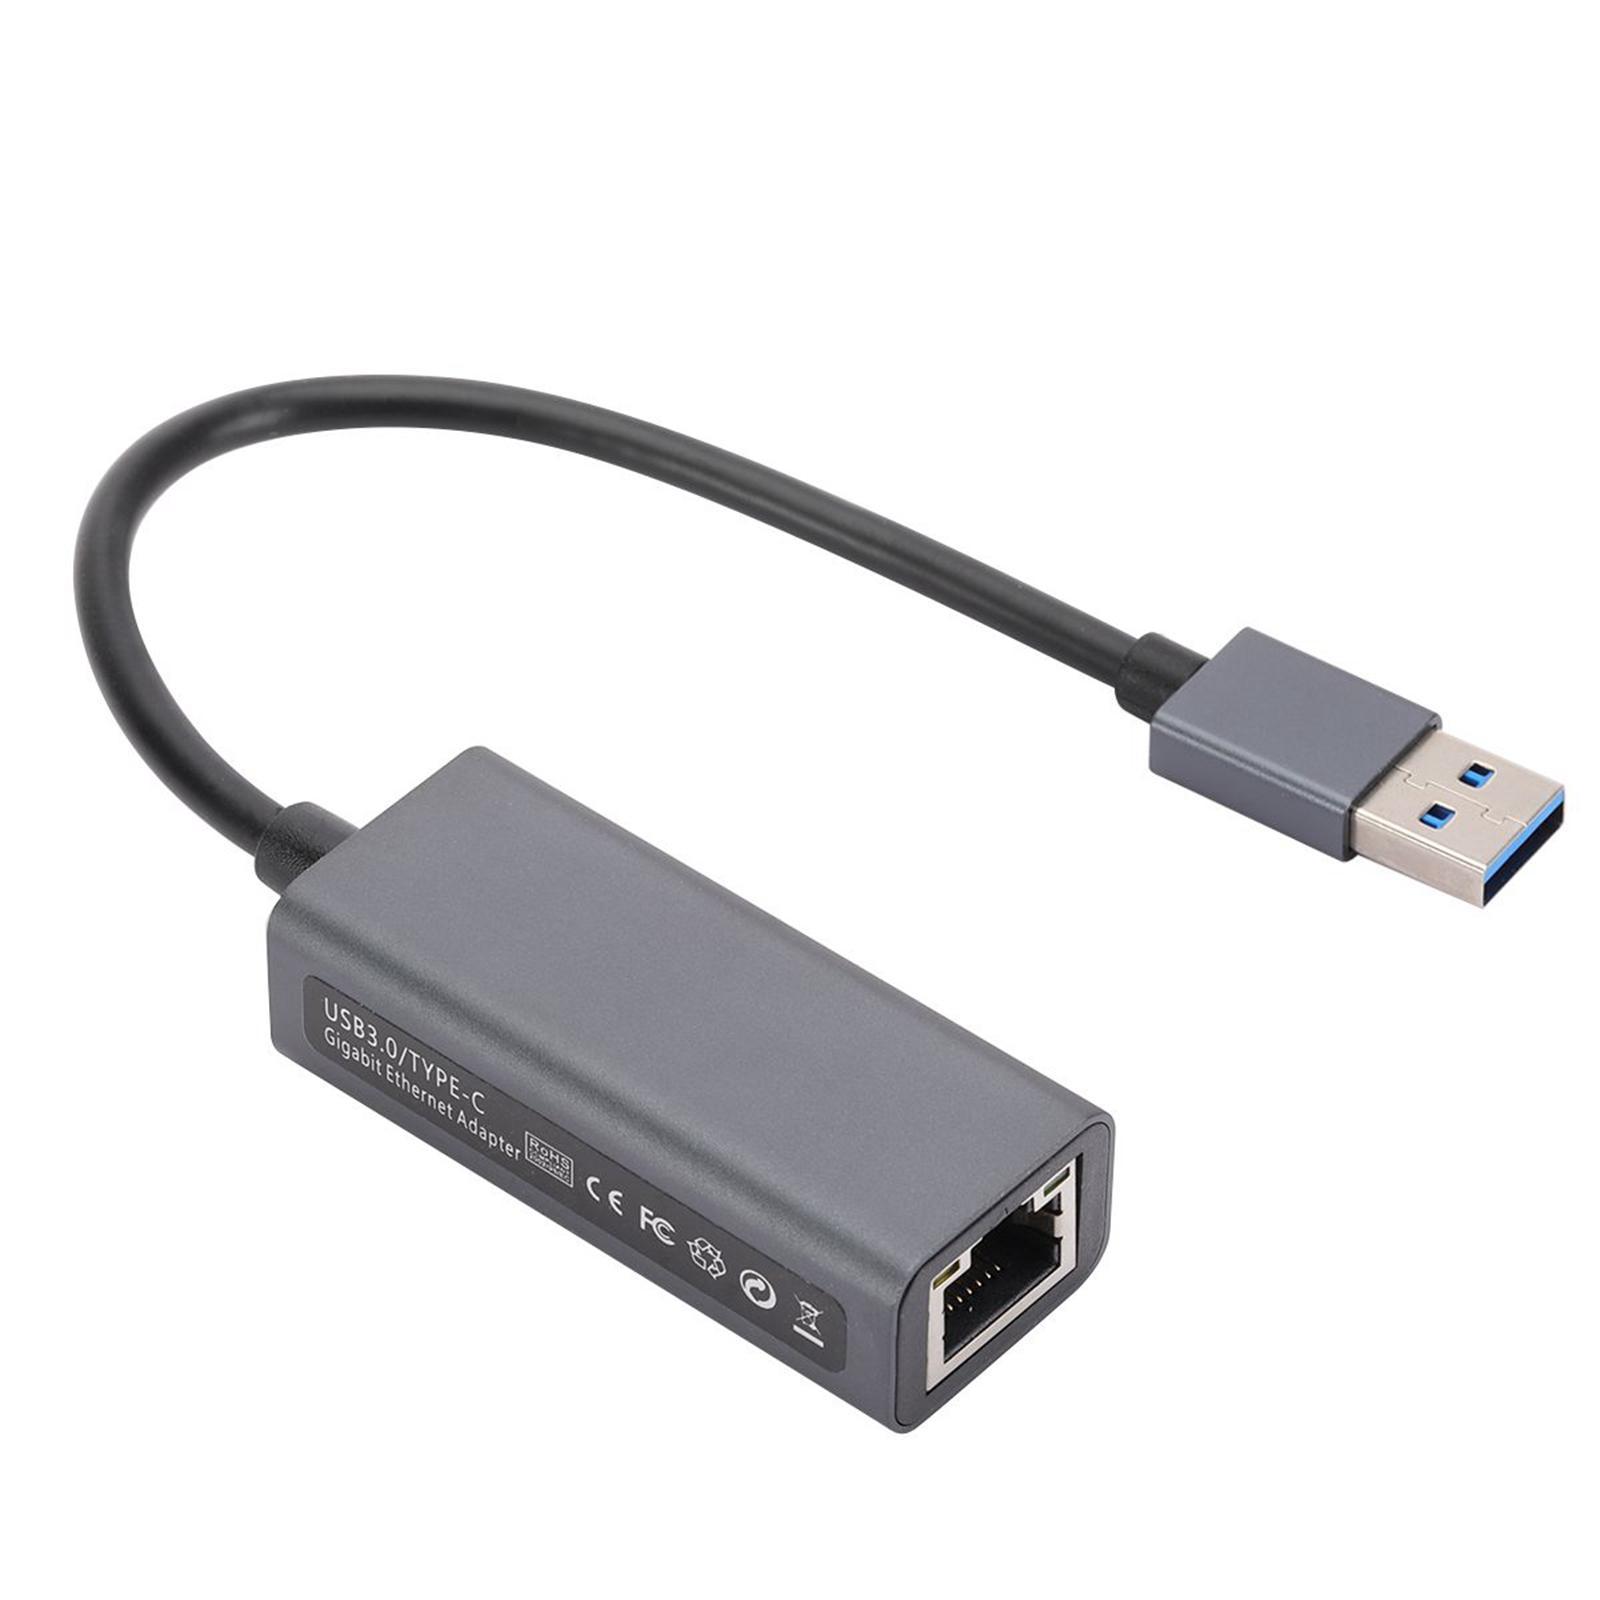 USB Ethernet Adapter, Dongle 10/100/1000Mbps High Speed Network Card for Windows PC Laptop